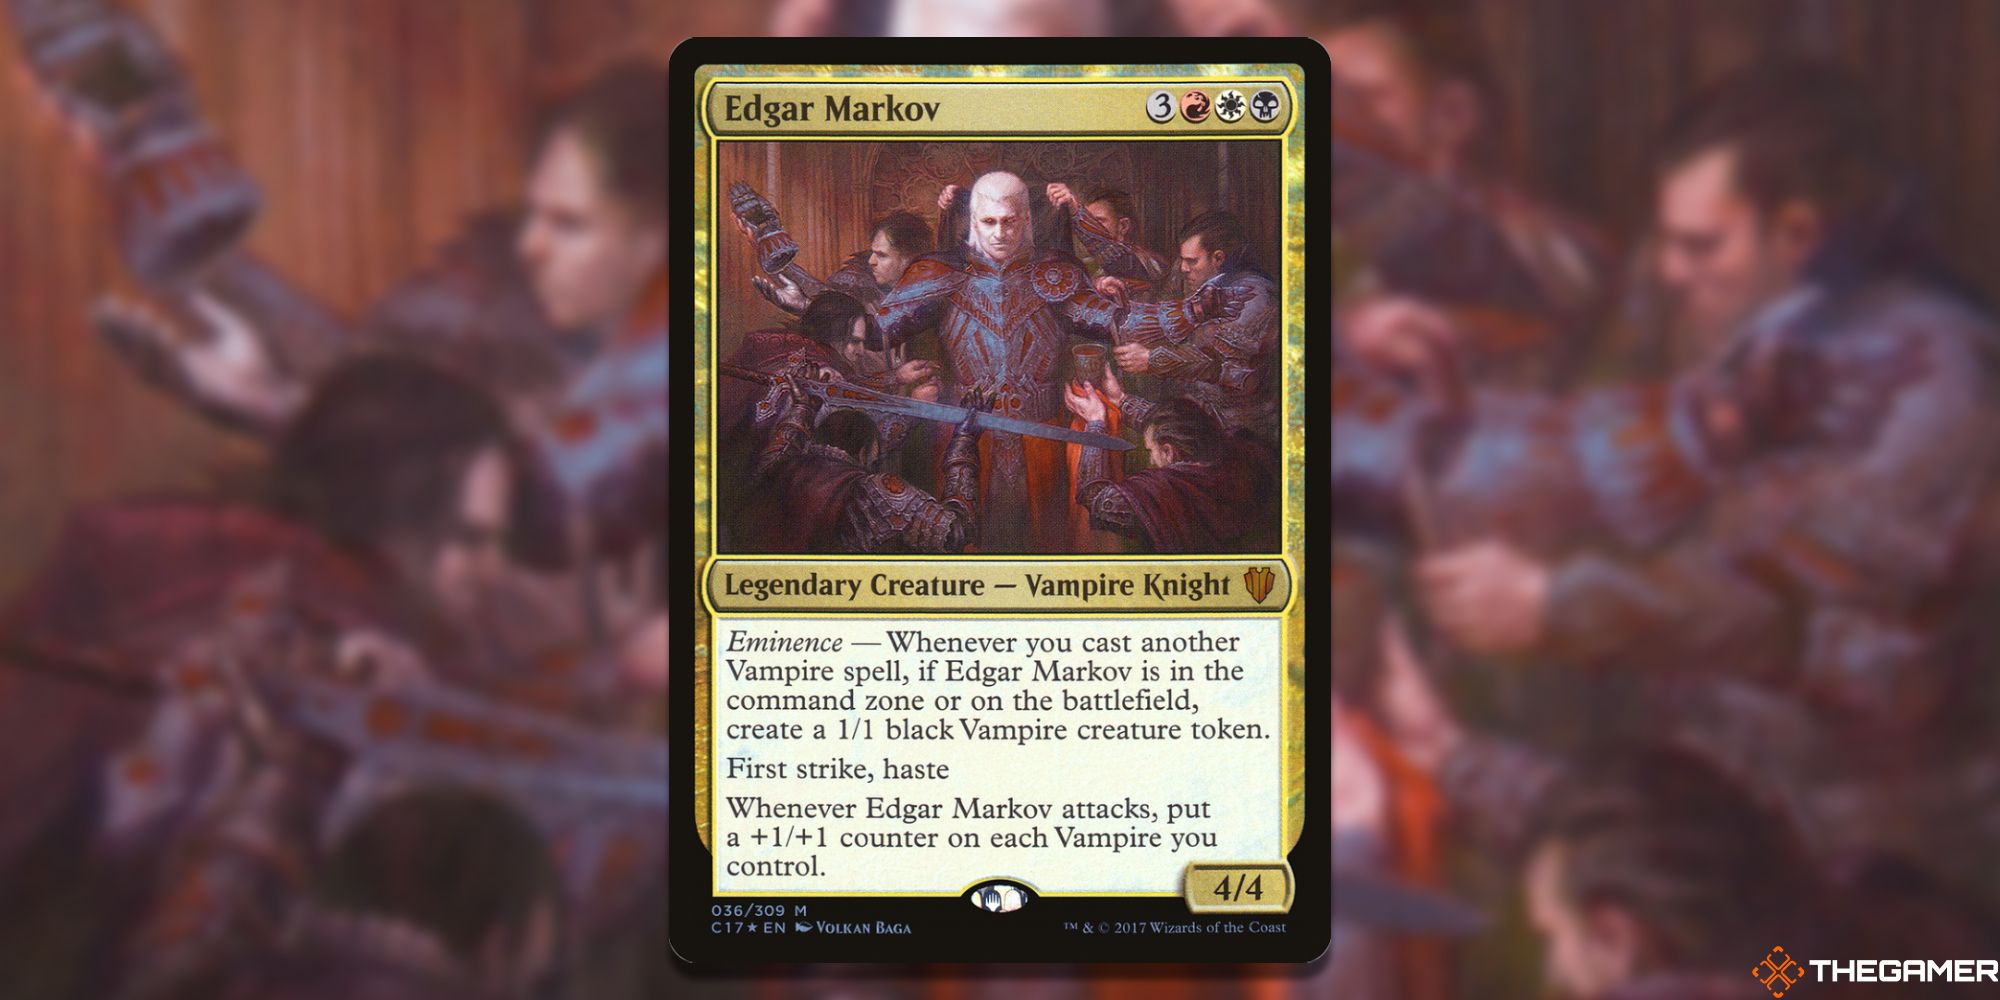 Image of the Edgar Markov card in Magic: The Gathering, with art by Volkan Baǵa